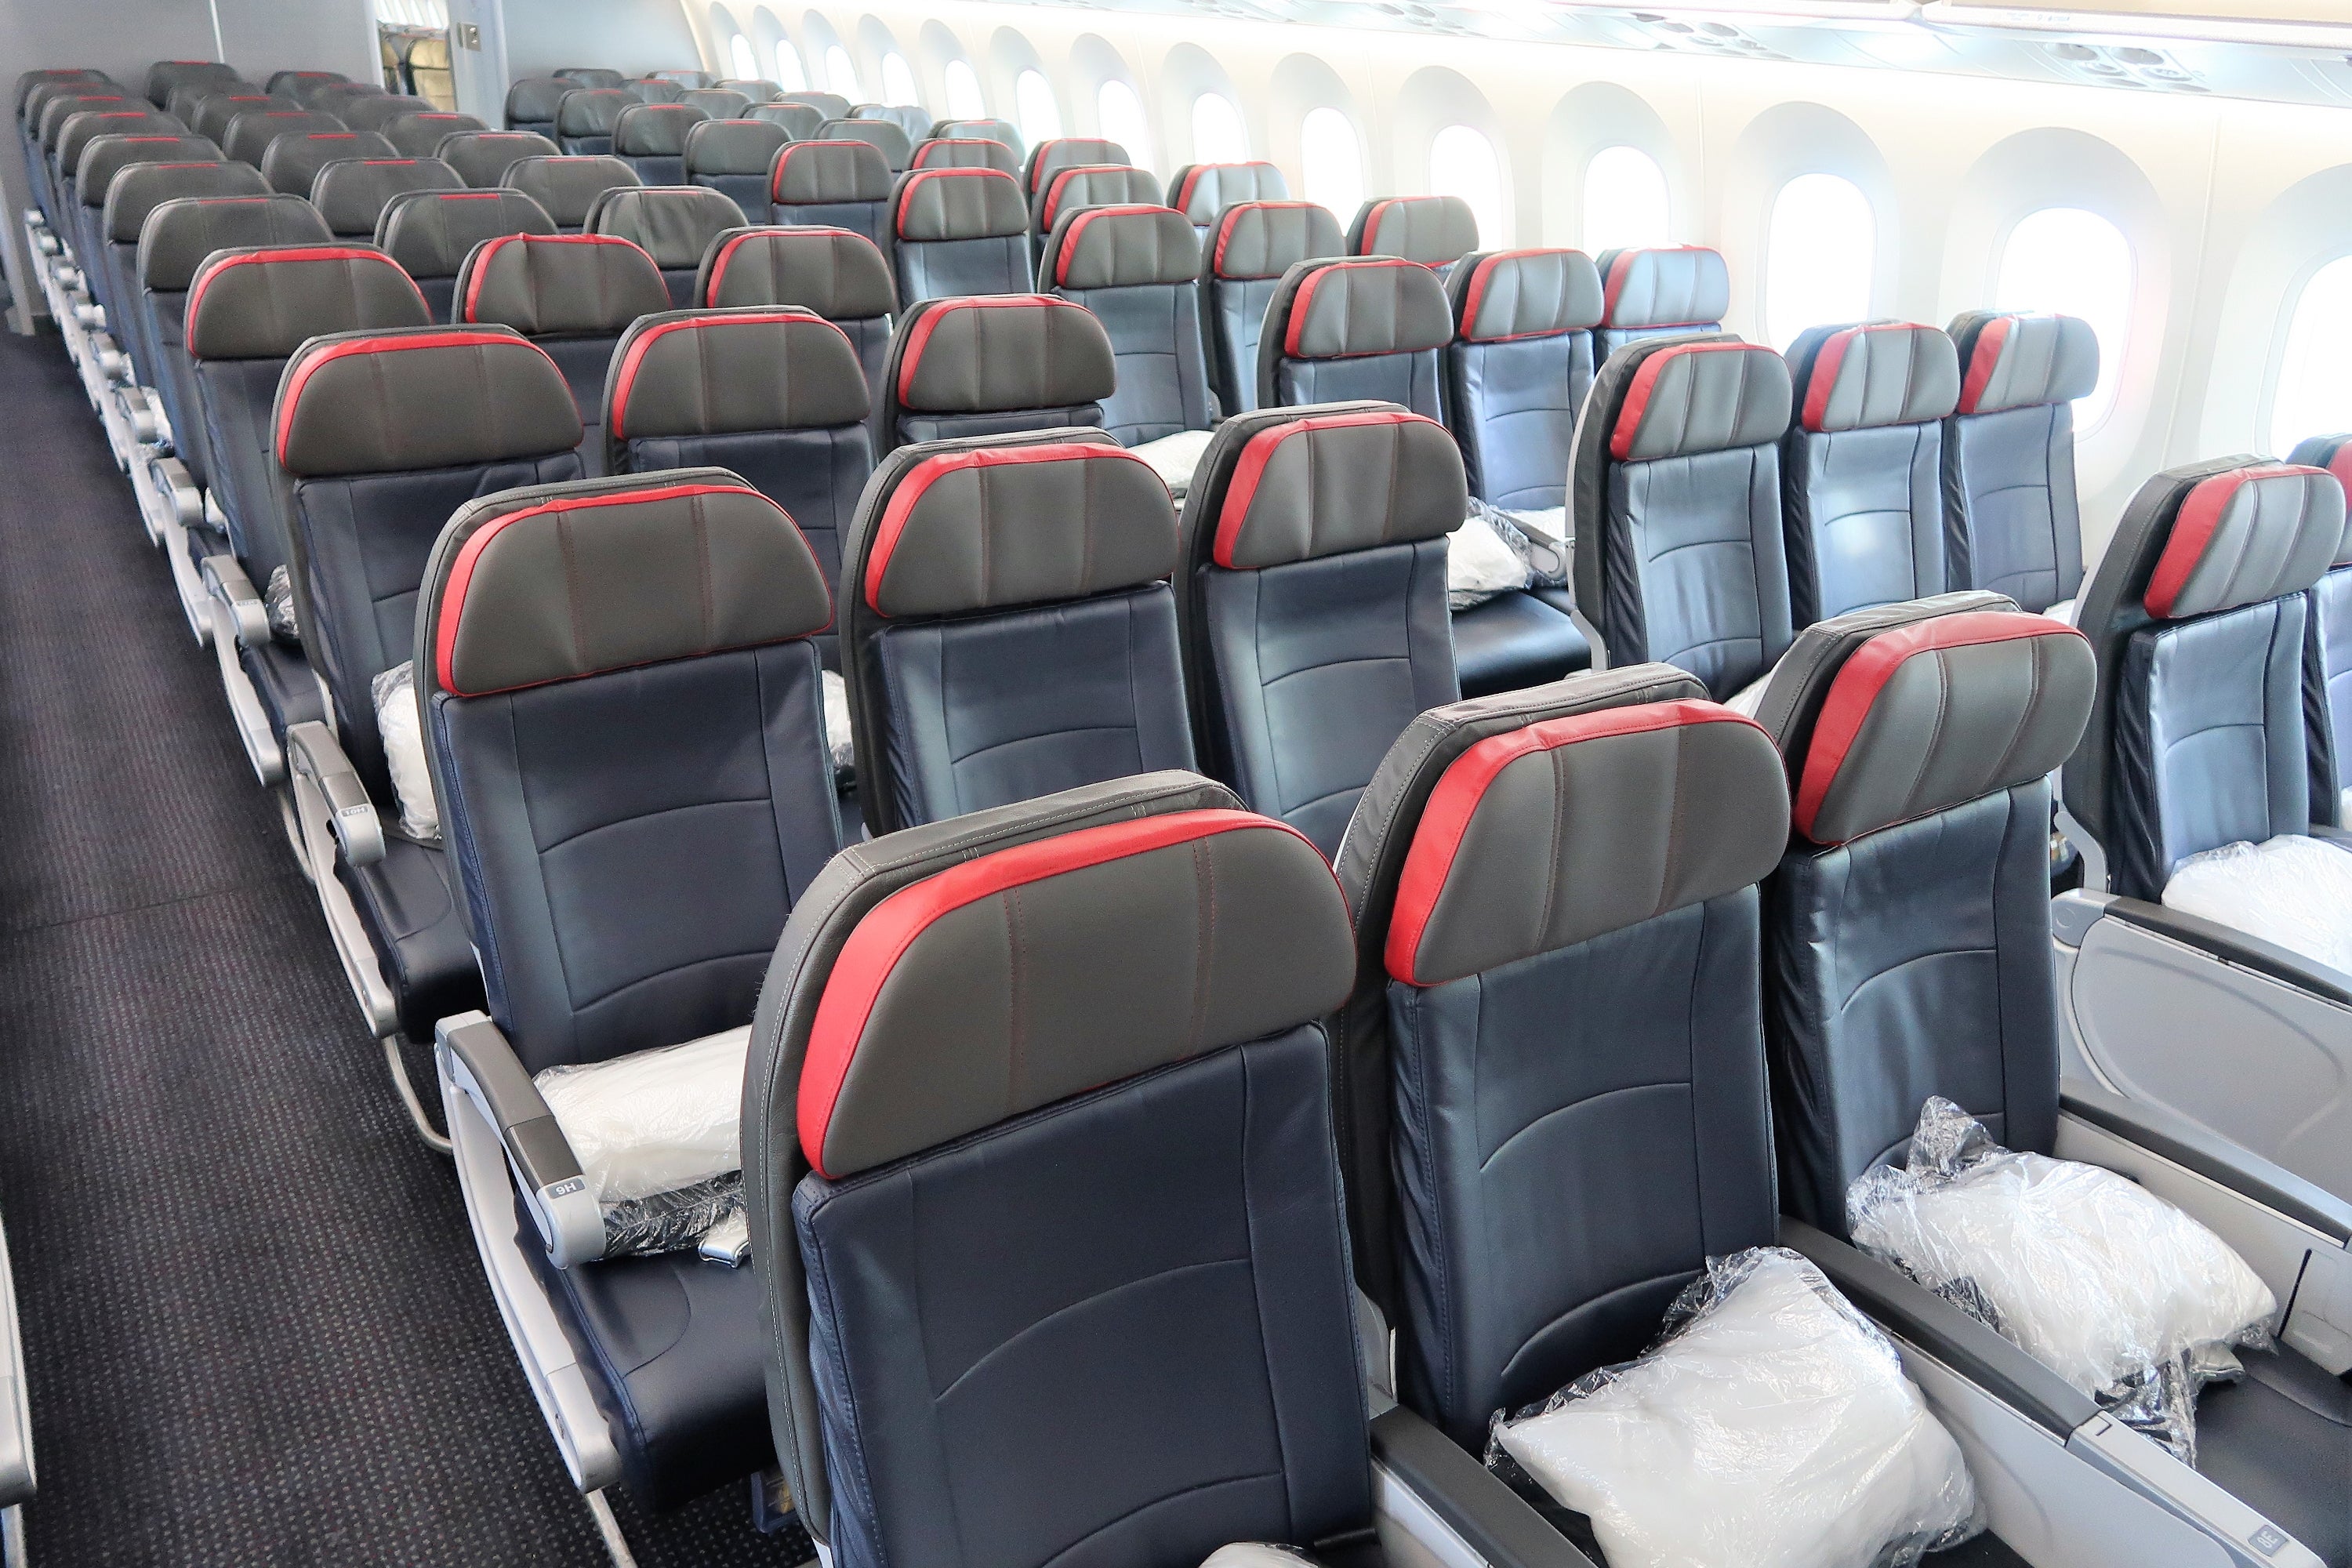 American Airlines Main Cabin: What to Know - NerdWallet